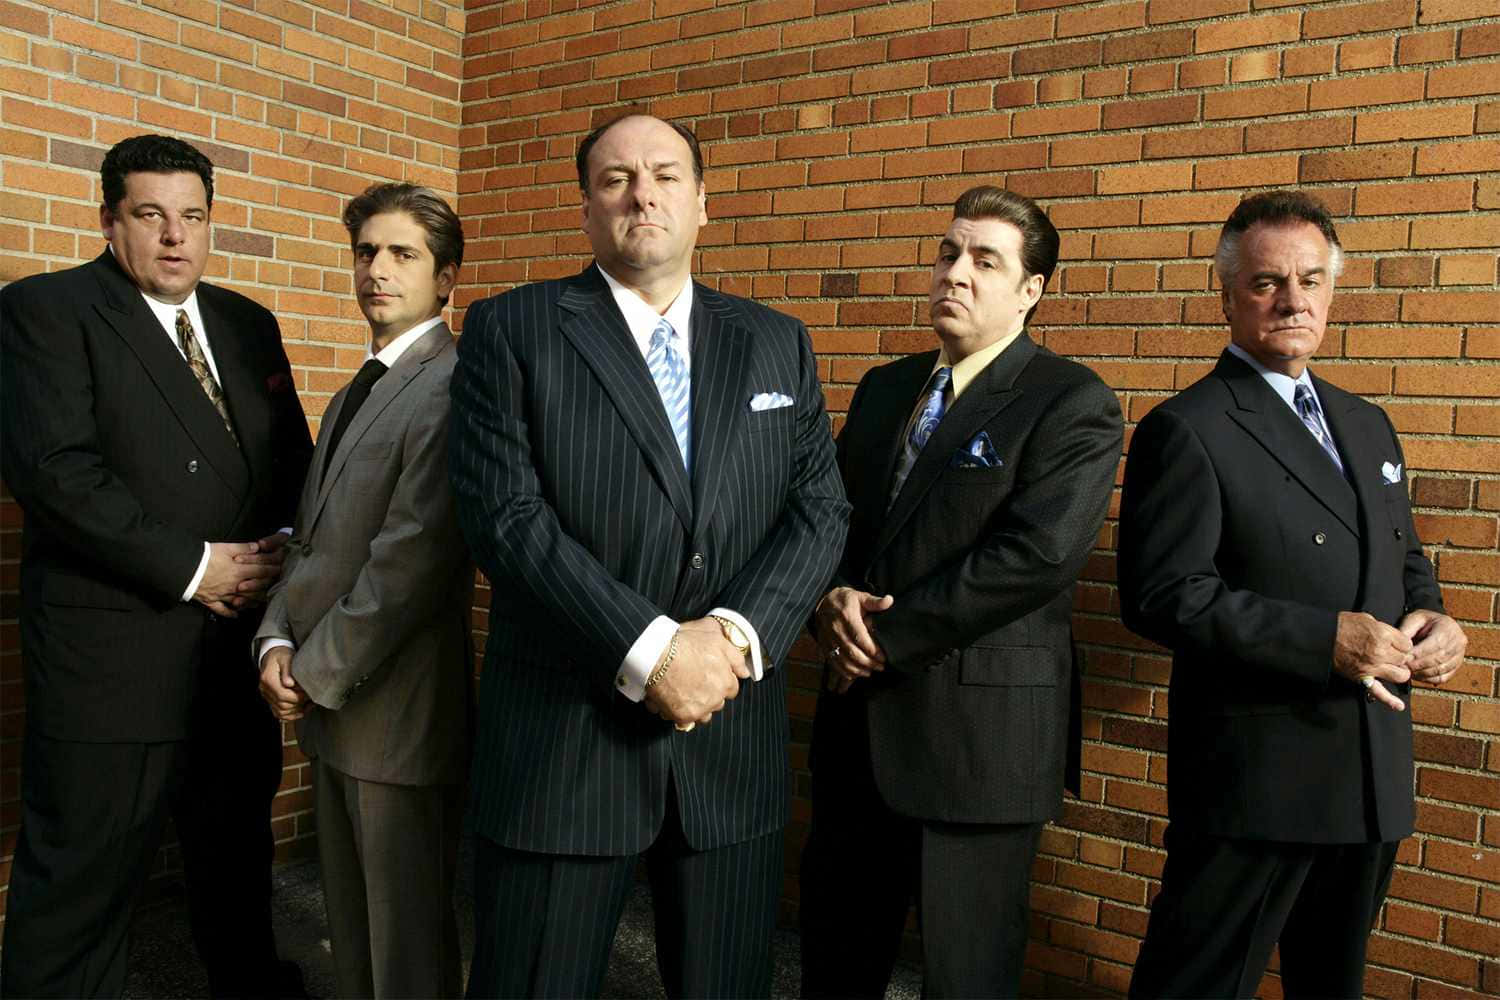 A Group Of Men In Suits Standing Next To A Brick Wall Wallpaper